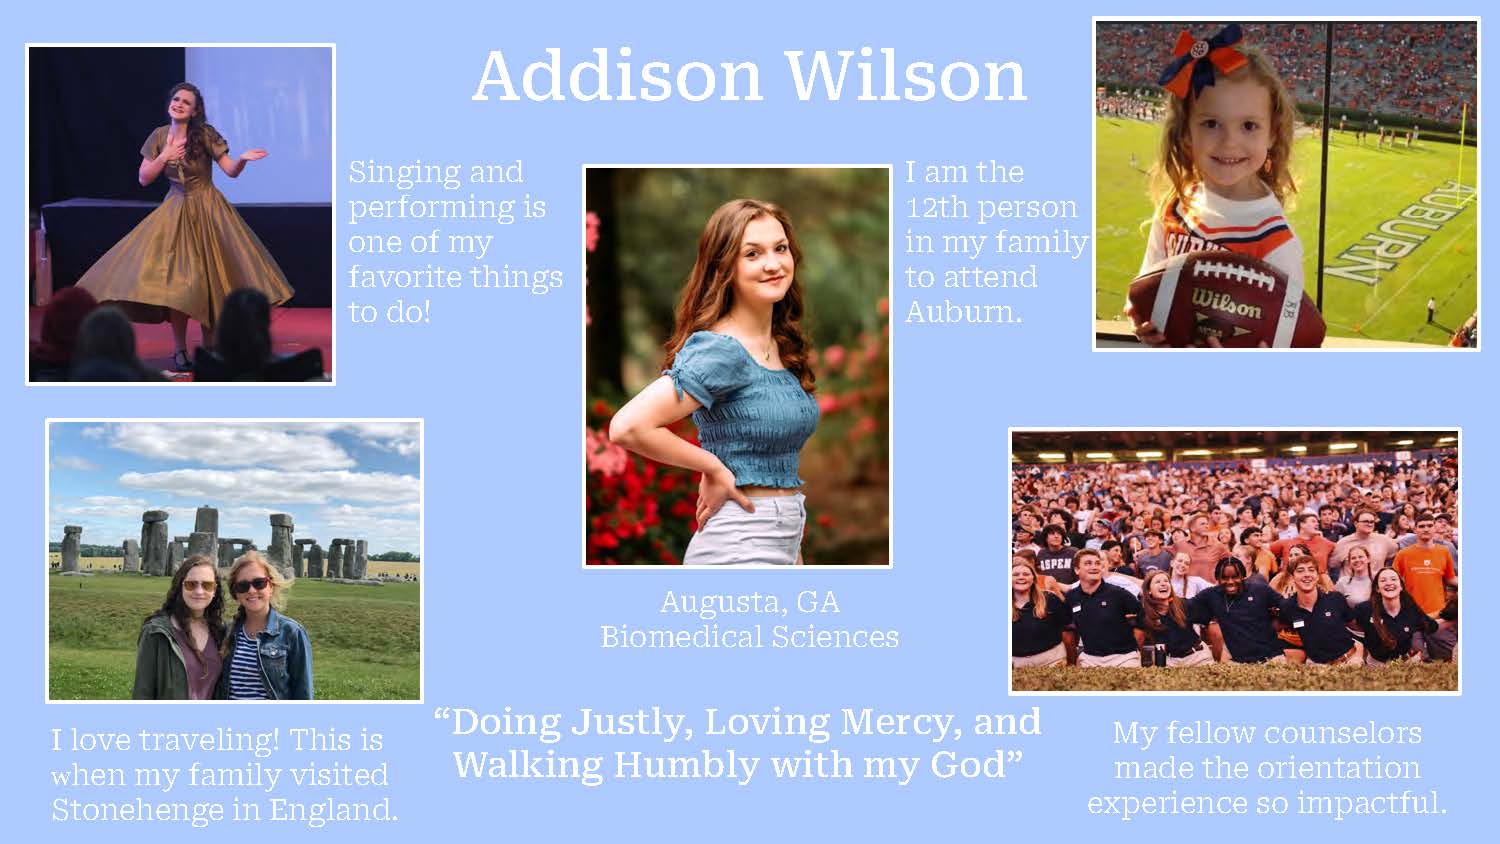 Addison's About Me Slide